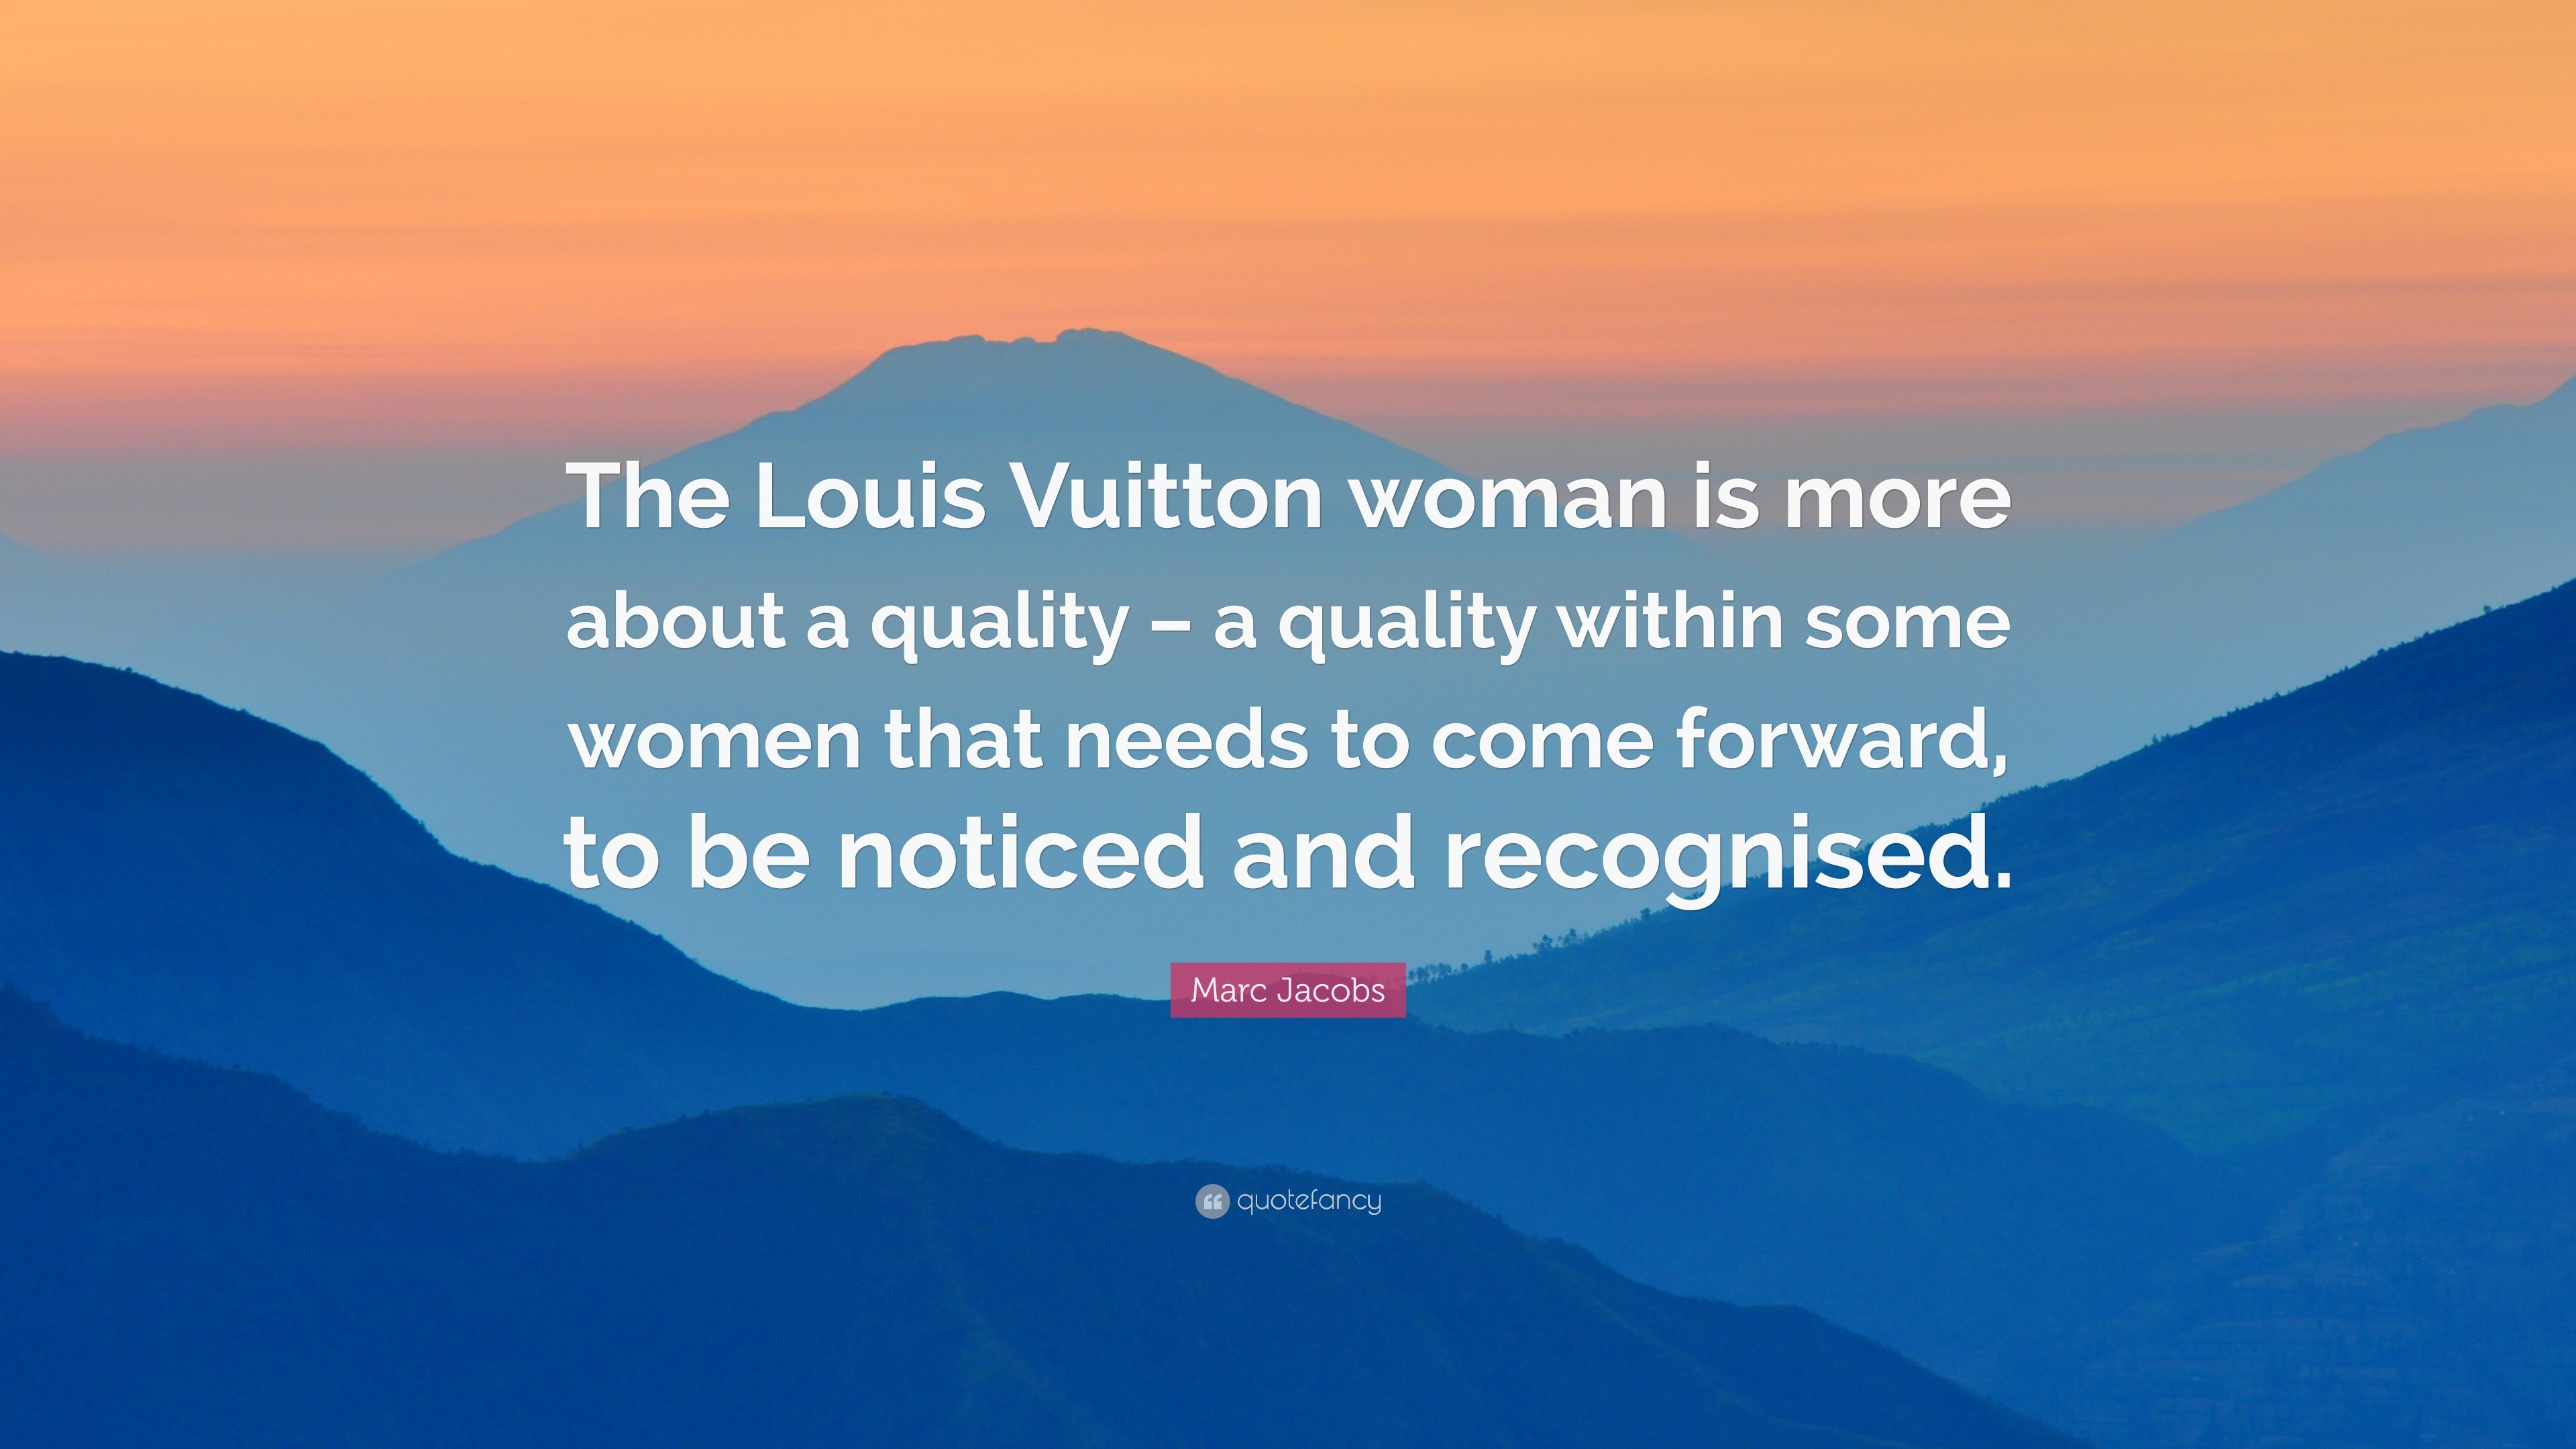 Marc Jacobs Quote: “The Louis Vuitton woman is more about a